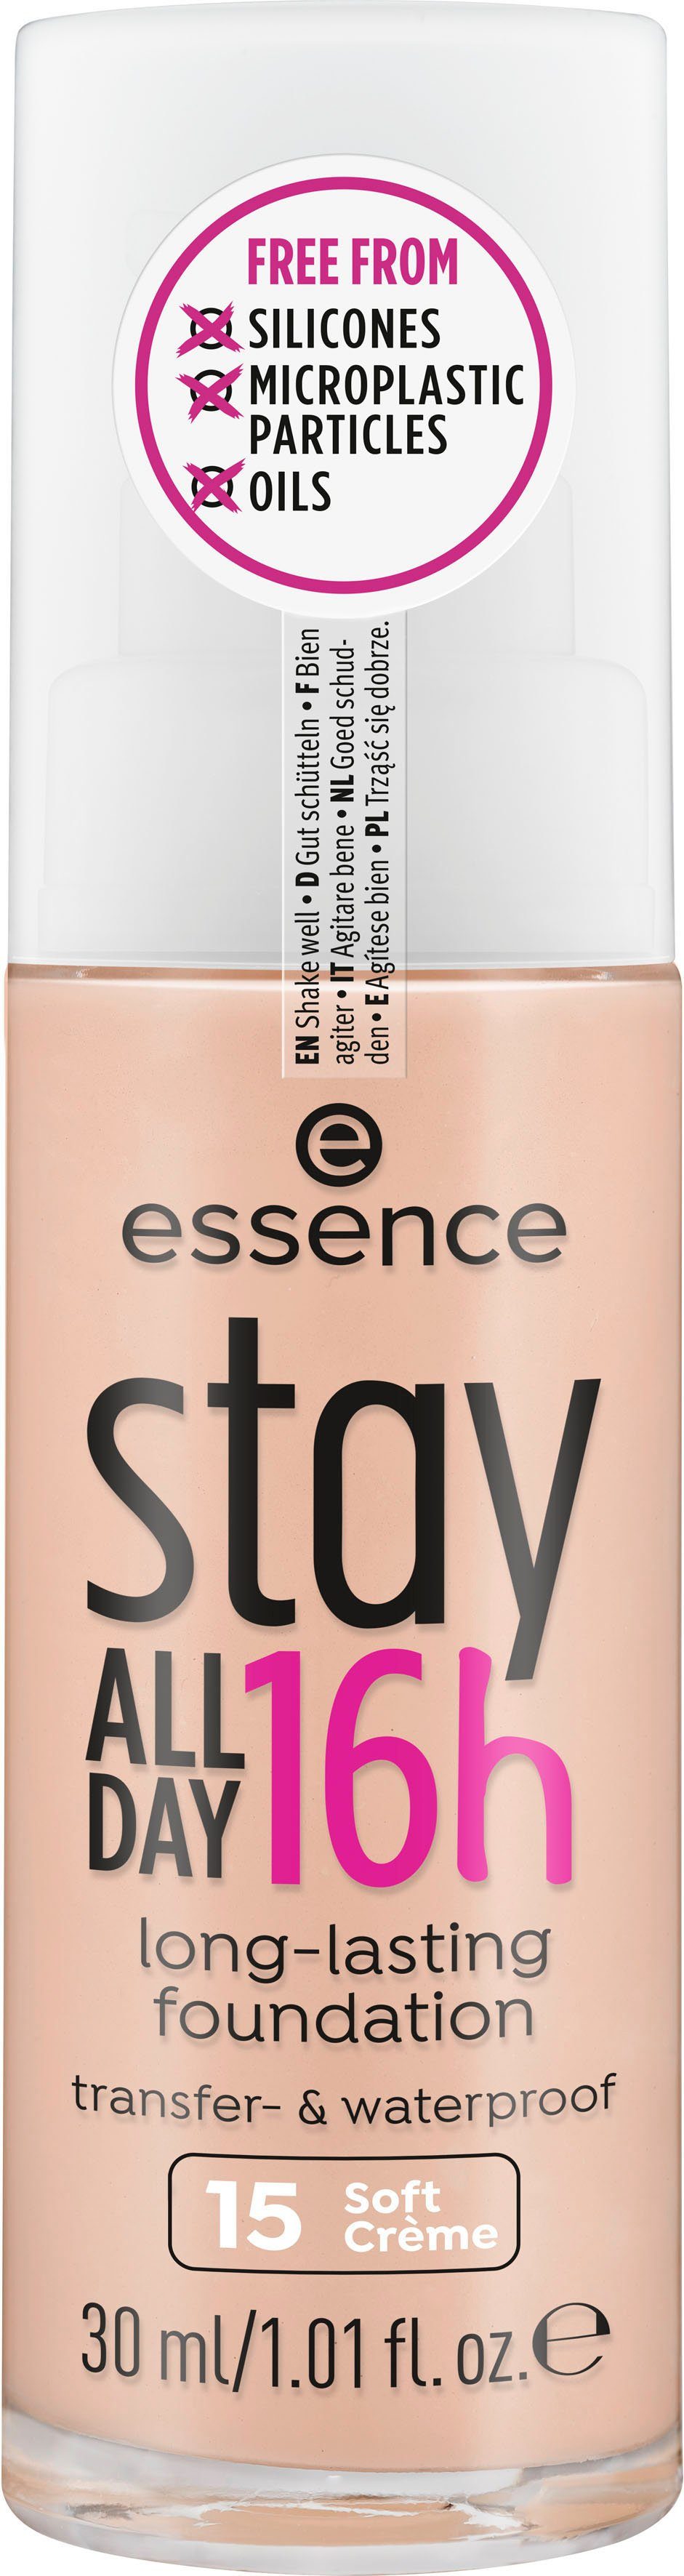 Soft Foundation Essence 16h Creme 3-tlg. ALL long-lasting, DAY stay